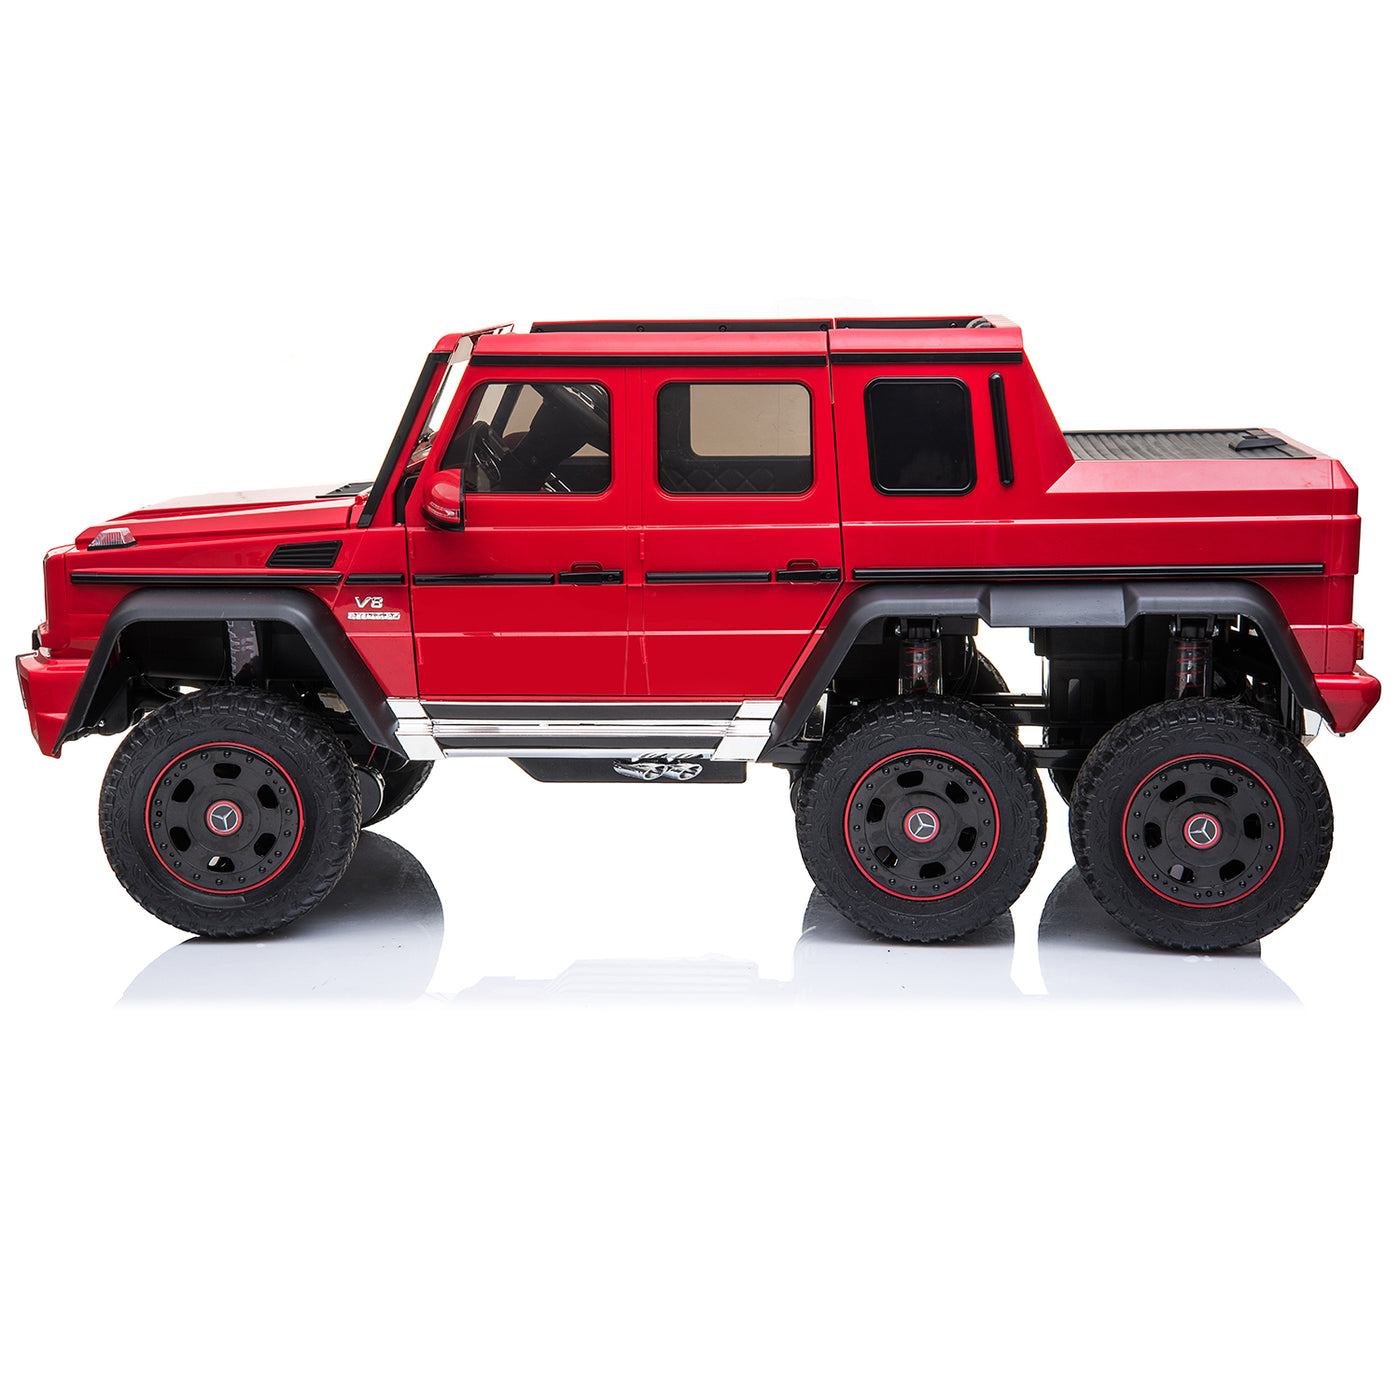 Licensed Mercedes Benz AMG G63 6x6 Ride On Car with 2.4G Remote Contro for Kids